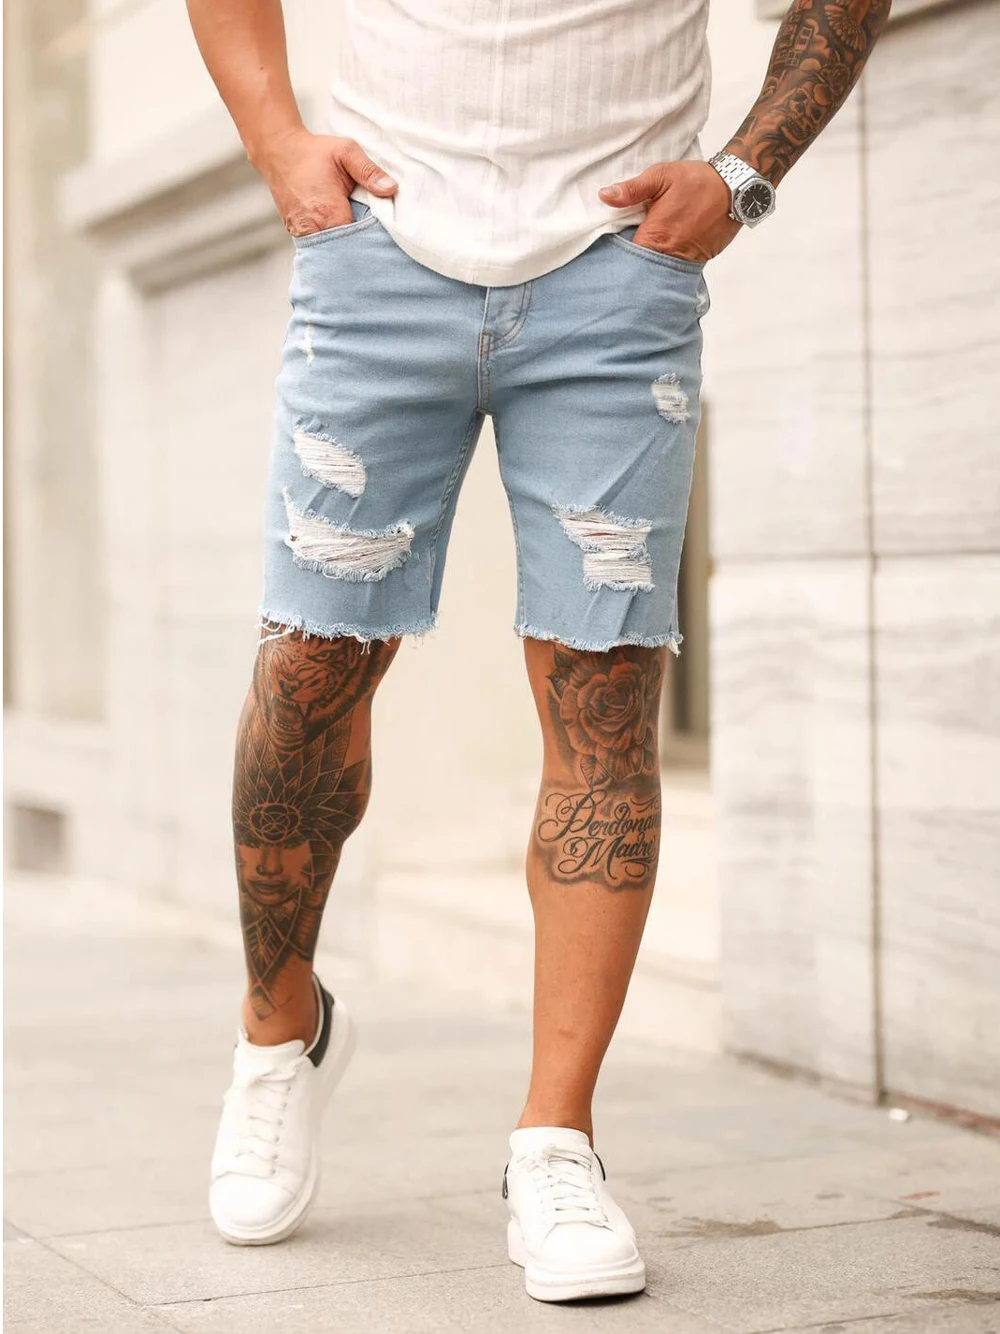 Summer Men's Fashion Jeans Casual Shorts Destroyed Skinny Jeans Ripped Pant Frayed Denim Shorts for Man Short Pants